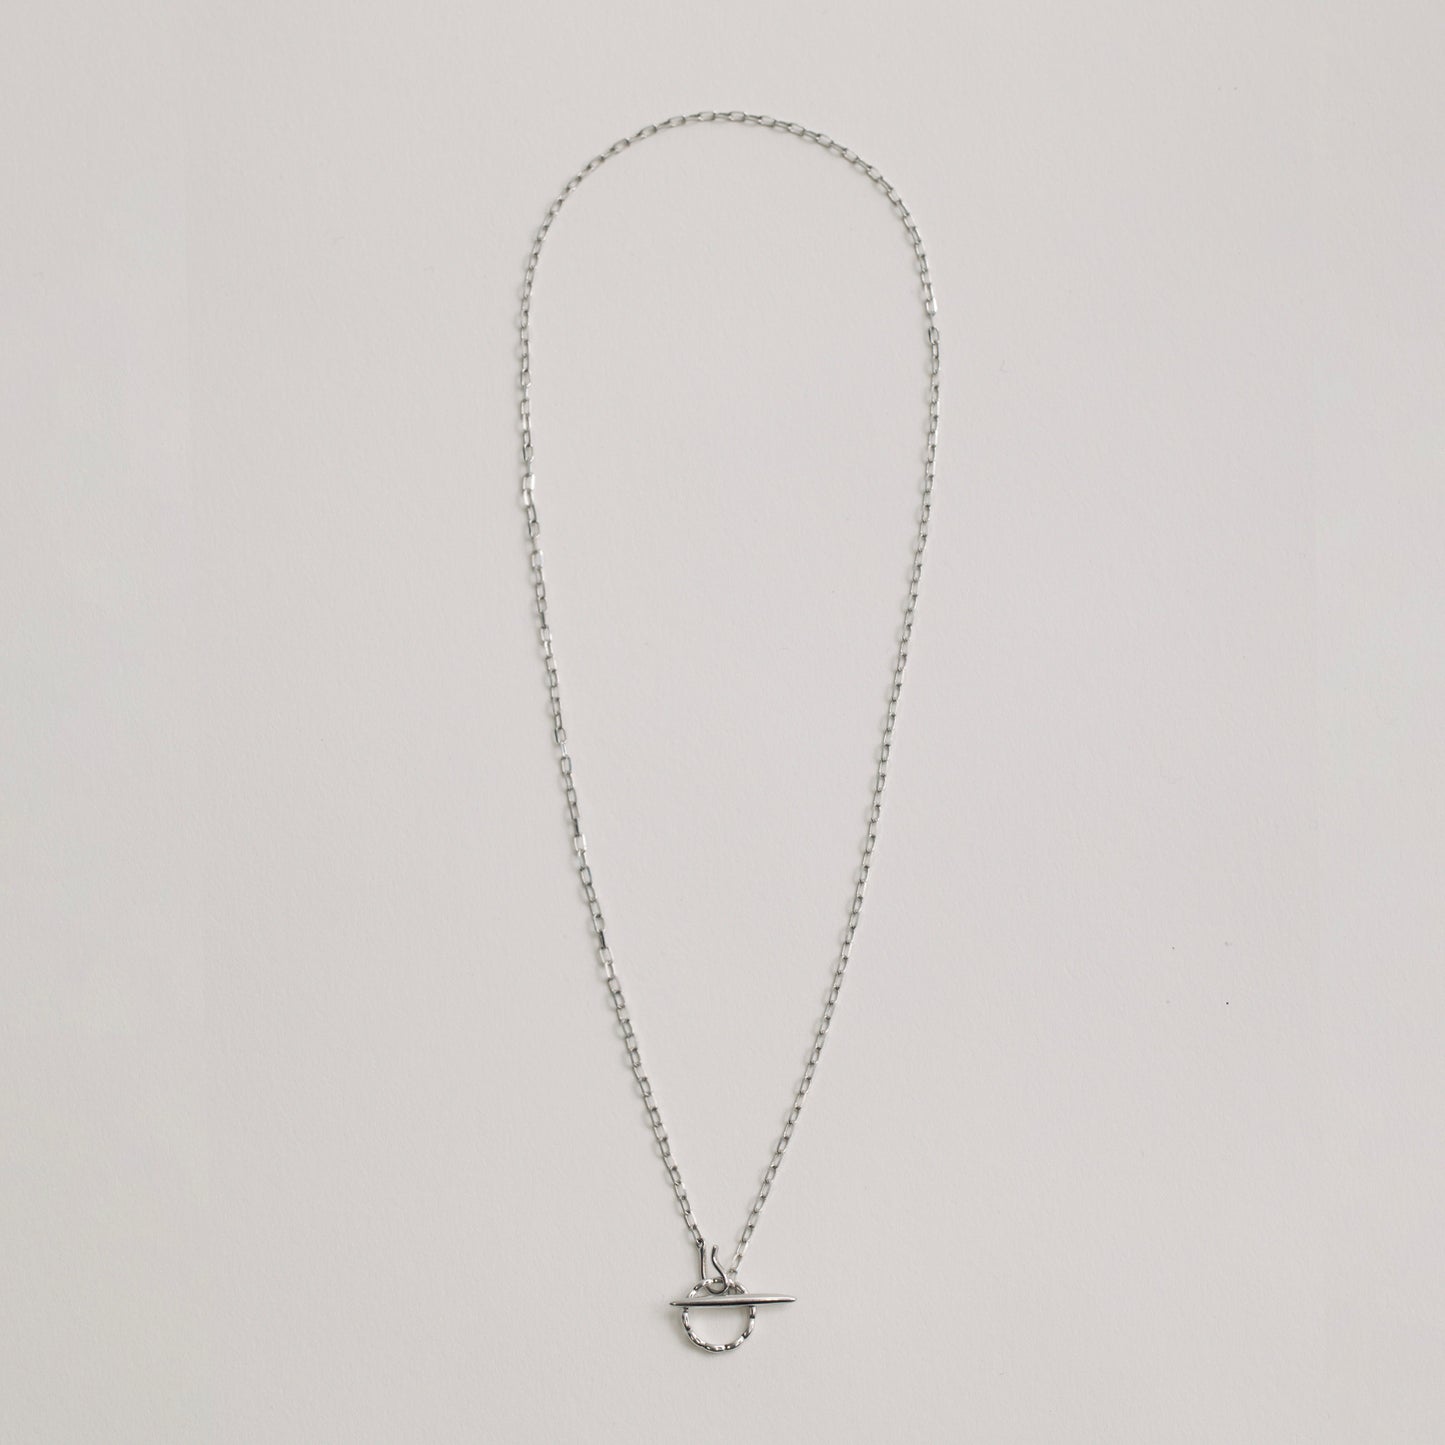 mitisマタニティジュエリーセット シルバー（Babyring Silver × Necklace Silver）